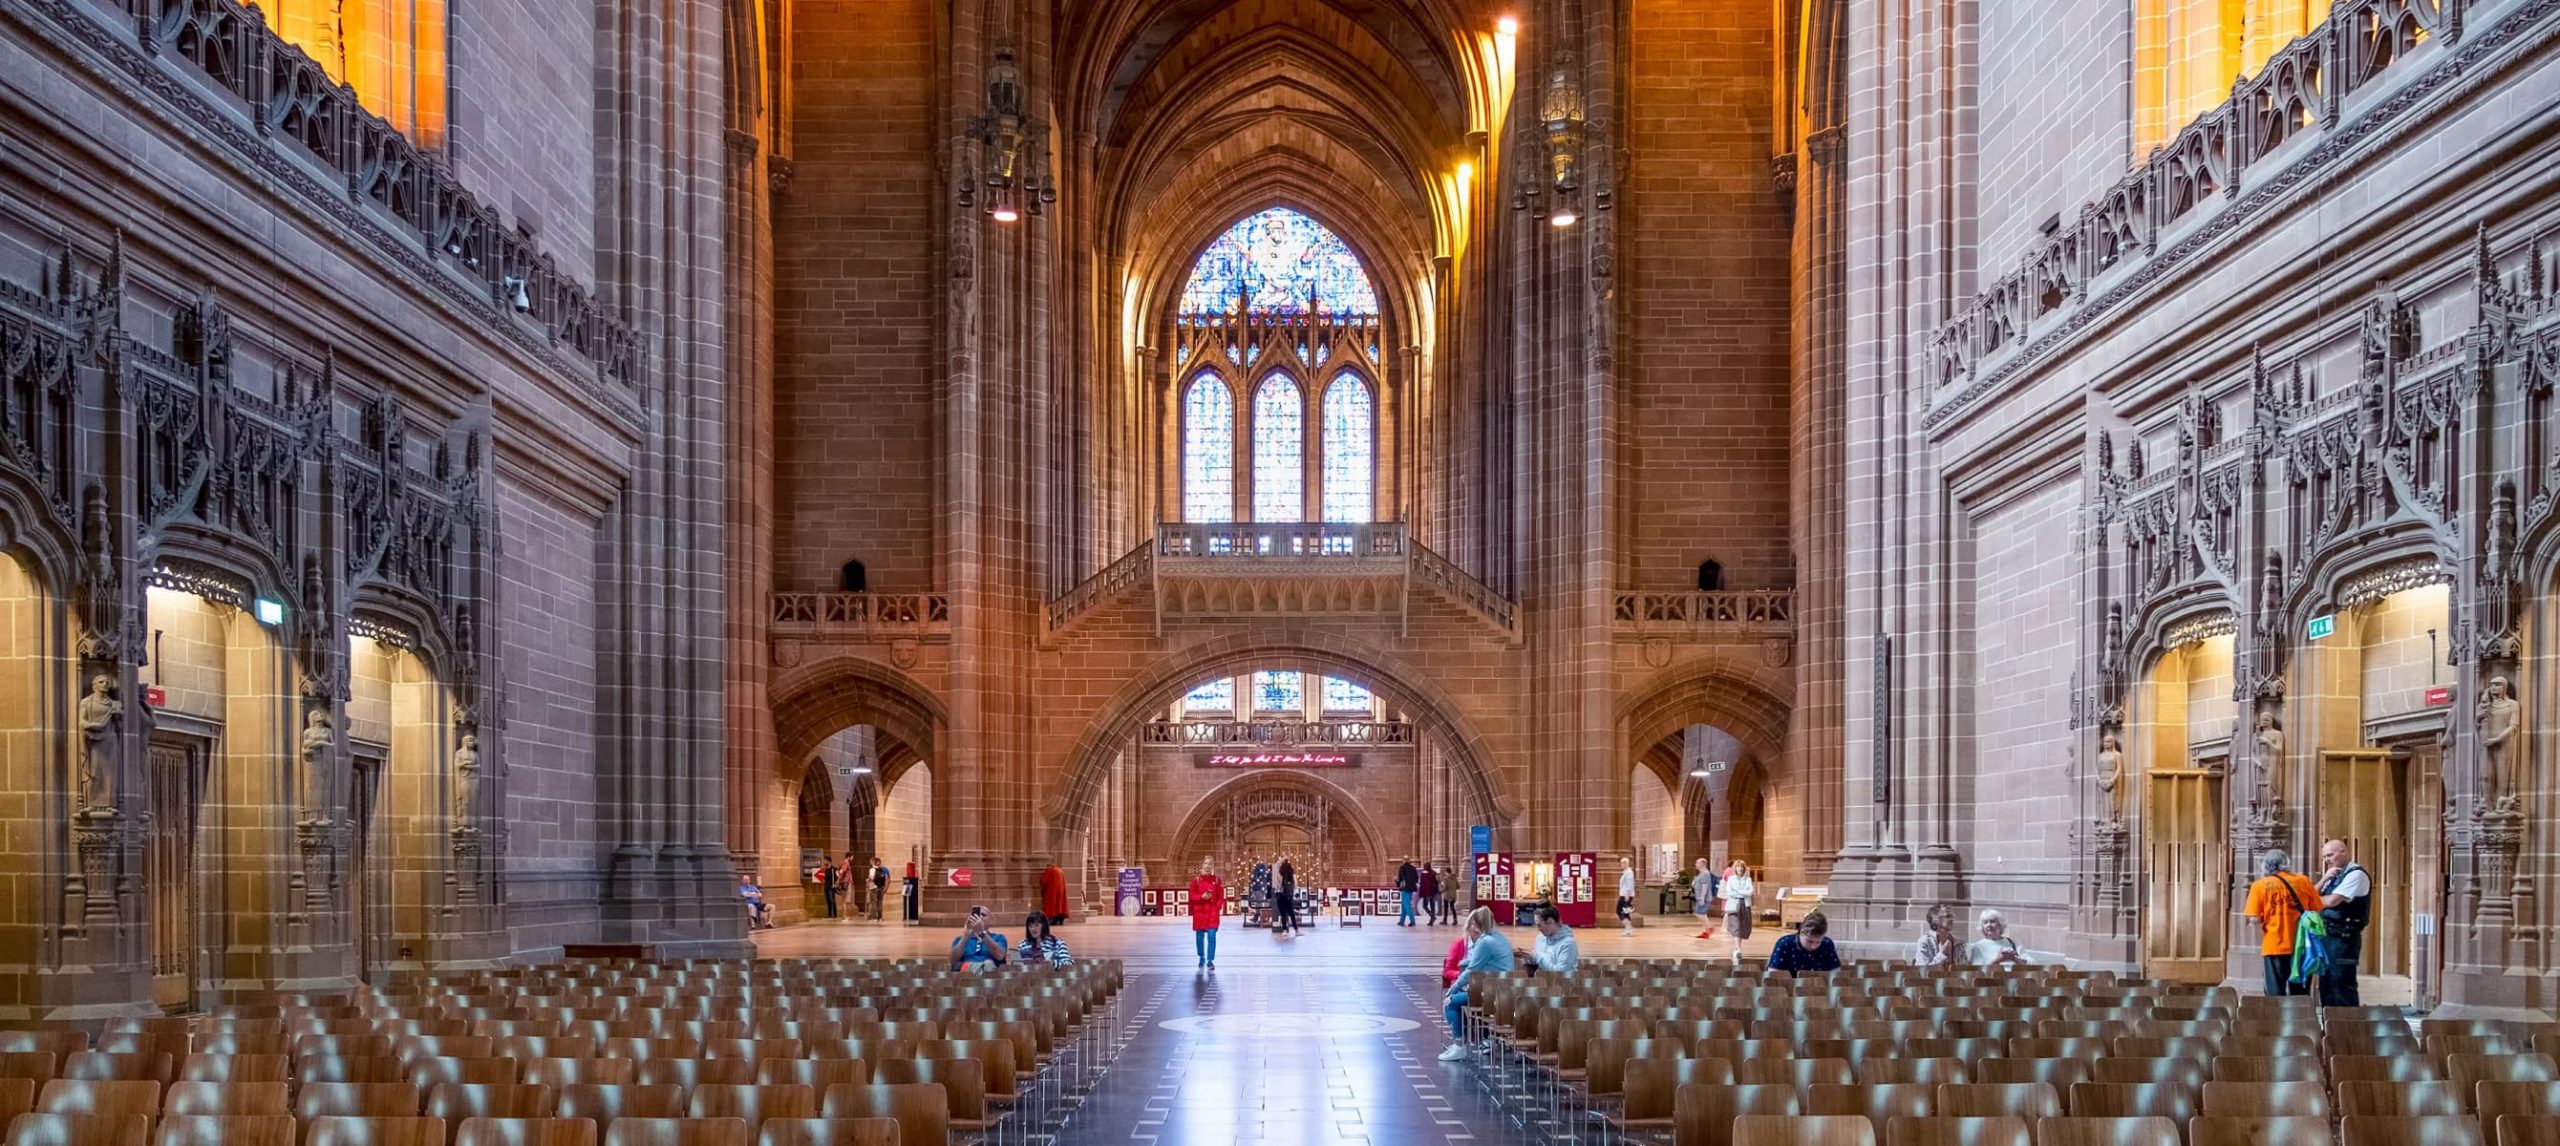 Liverpool Cathedrals: The Complete Guide